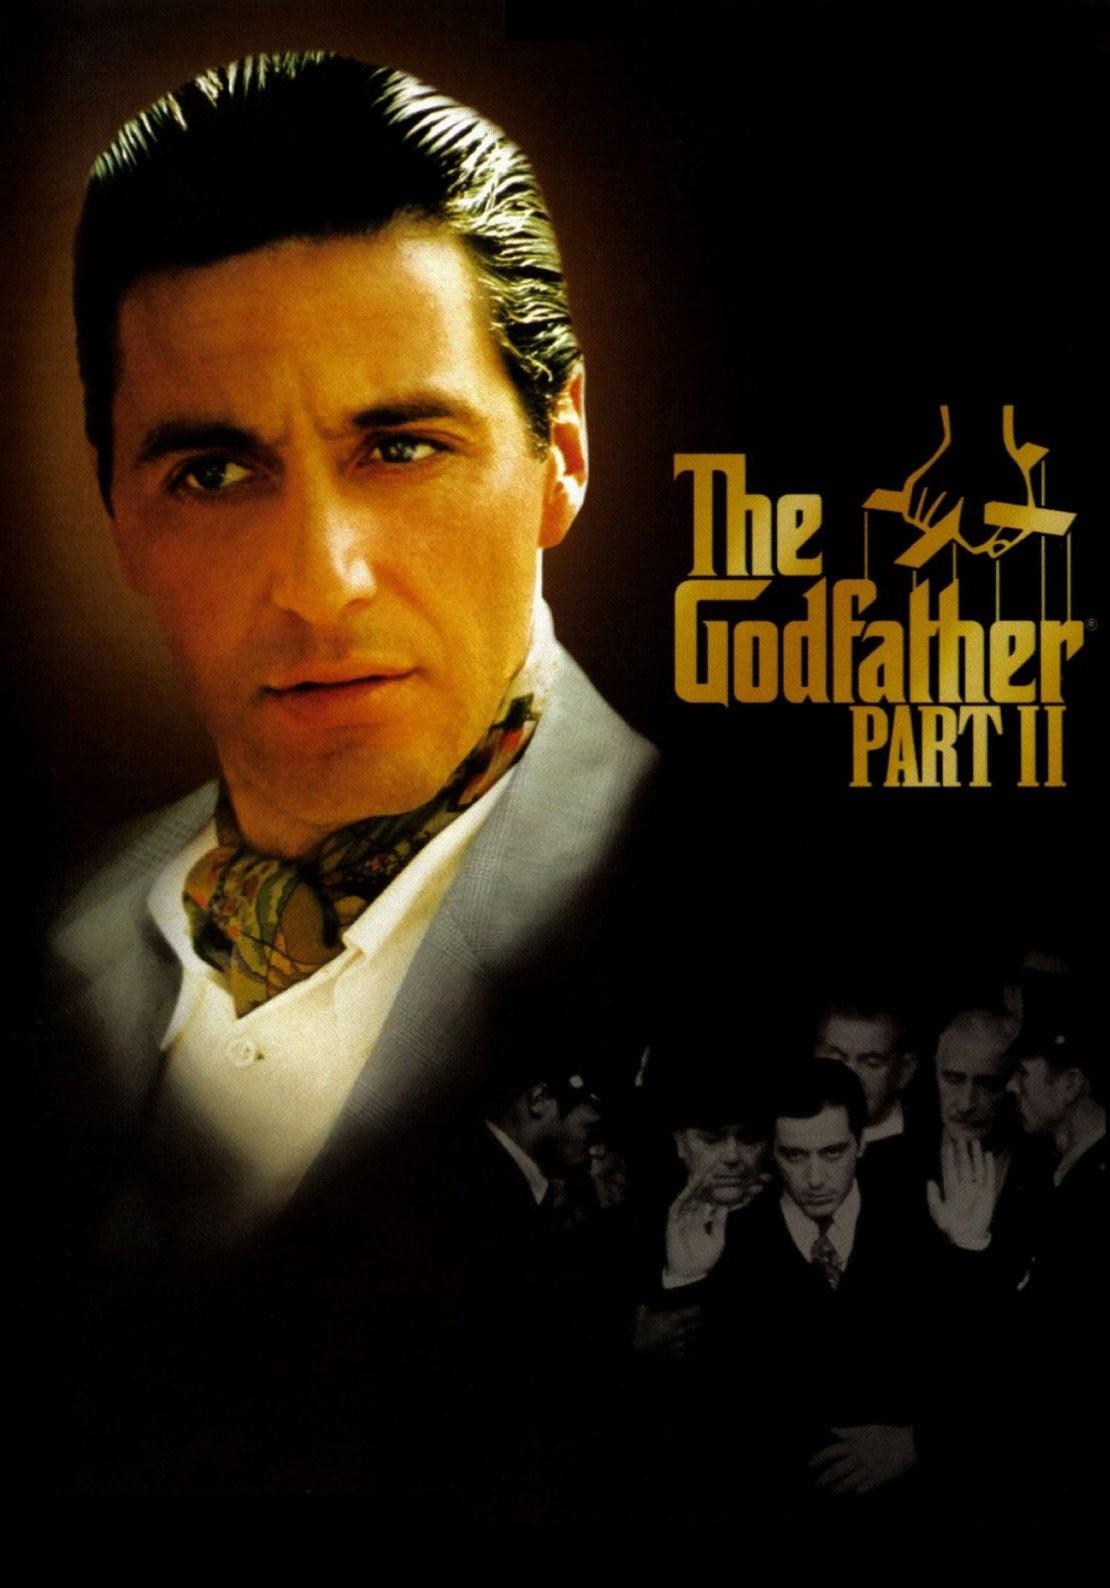 The Godfather Part II, movies, Al Pacino, The Godfather